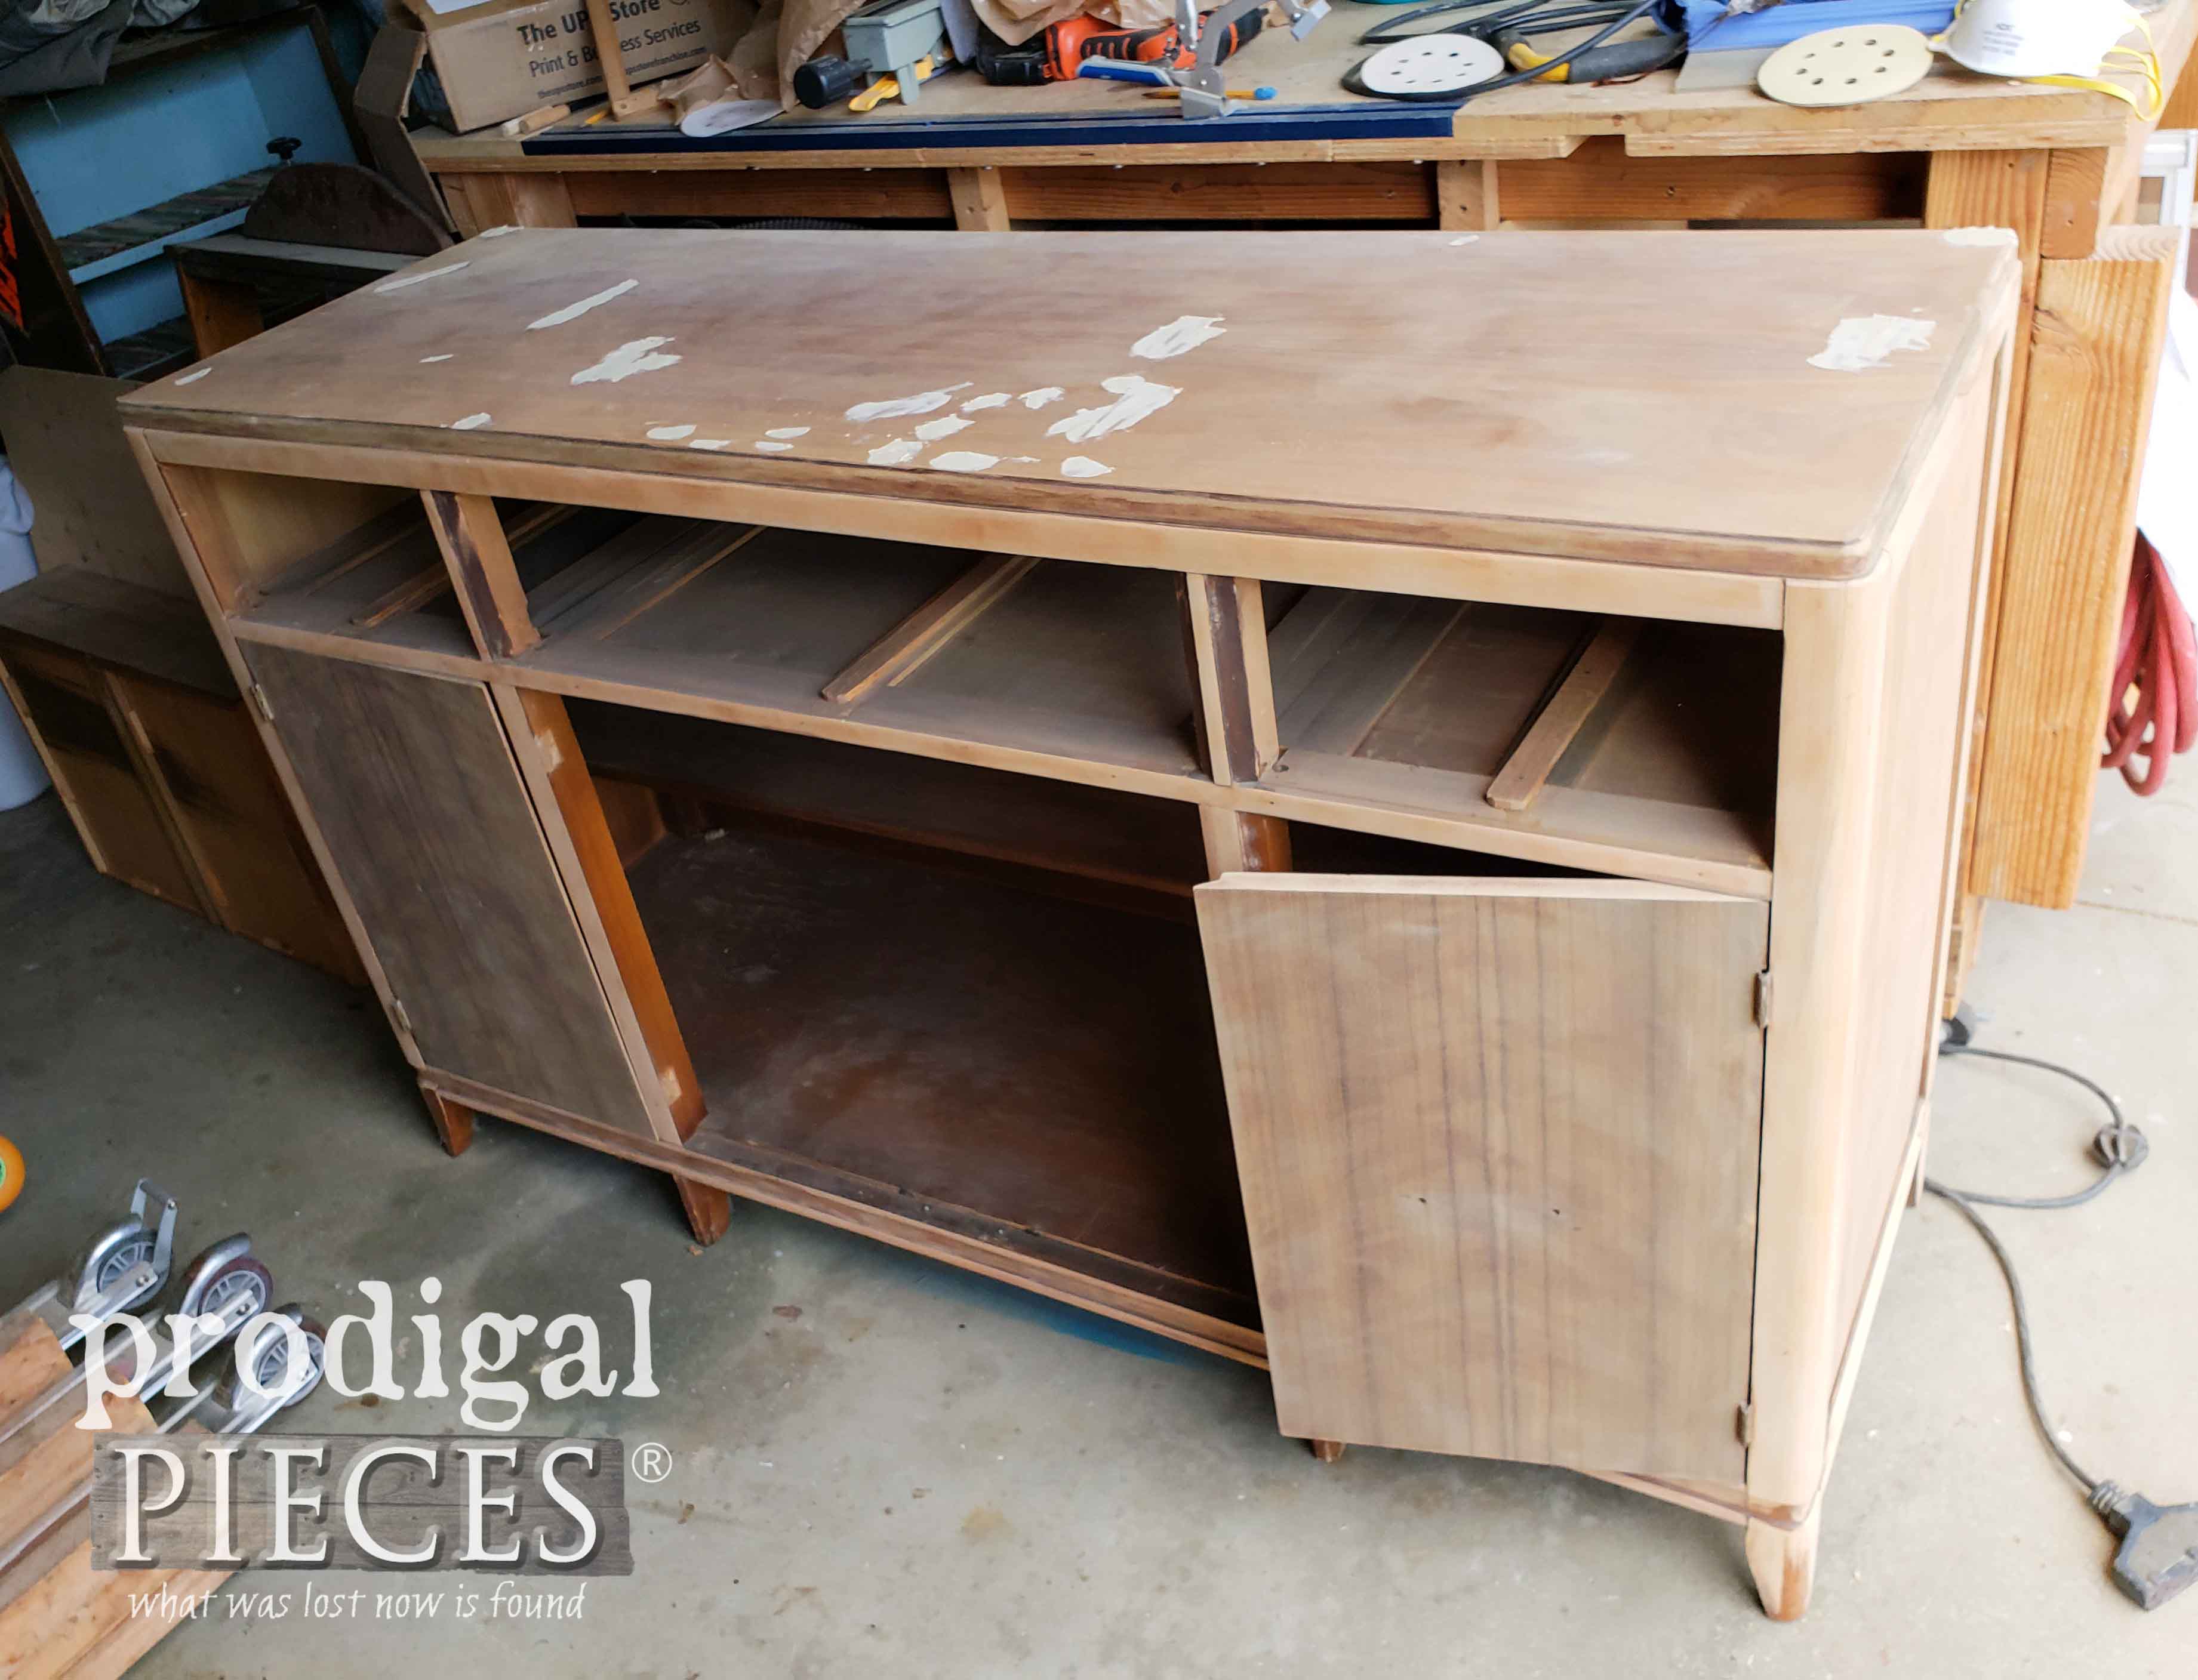 Sanded and Repaired Vintage Art Deco Buffet | prodigalpieces.com